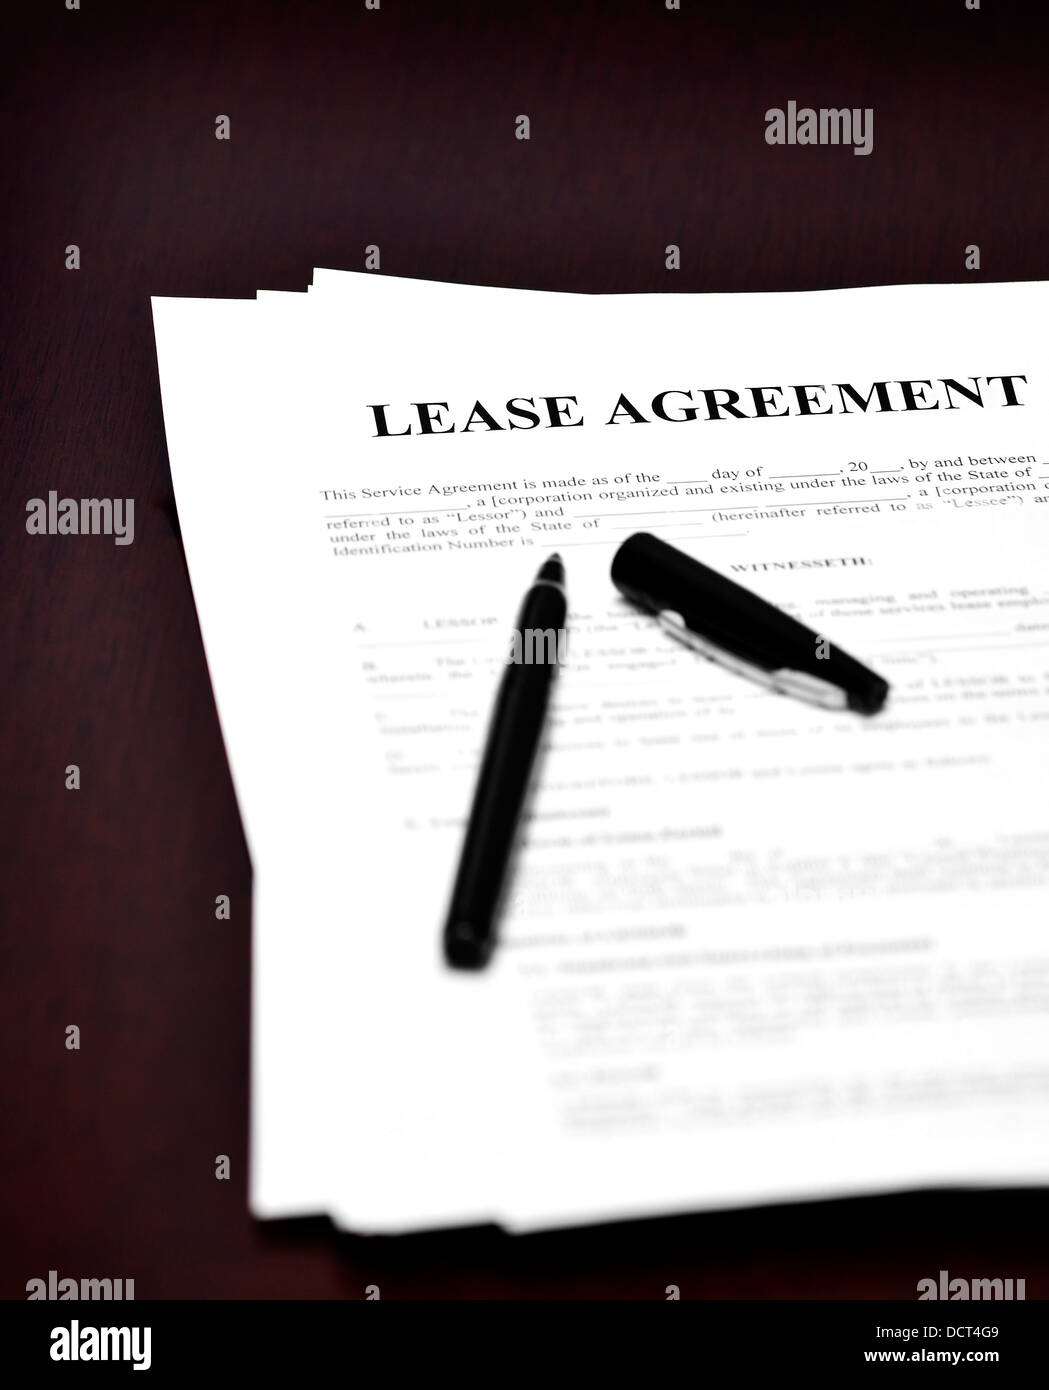 Lease Agreement on desk with black pen waiting to be signed Stock Photo